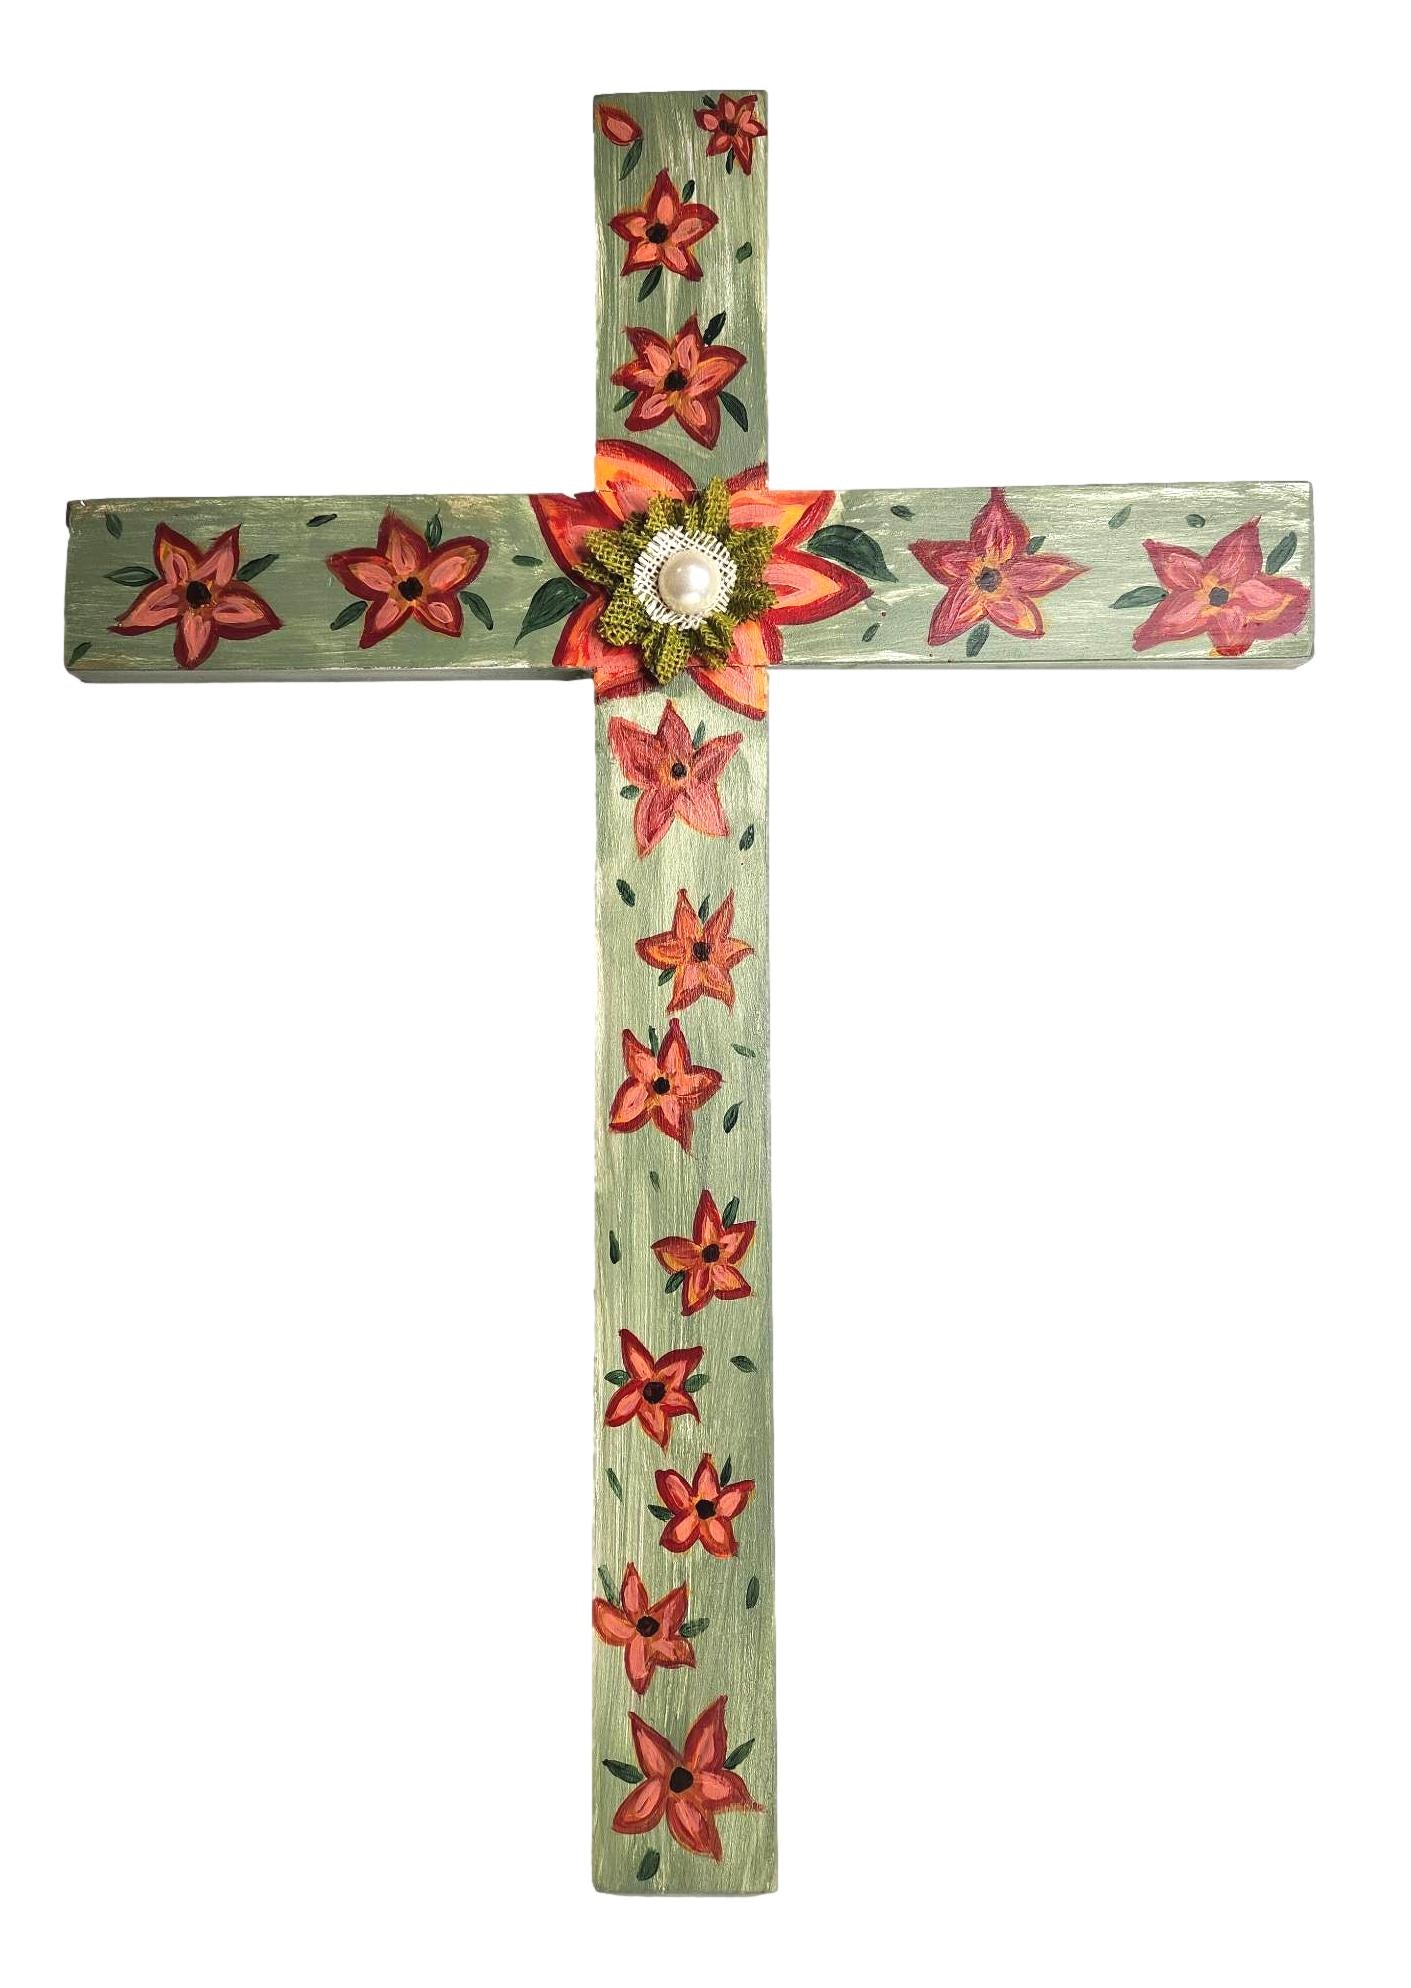 Cross Large Wood Wall Hanging Pink Floral Design Handpainted With Green Burlap Pearl Accent Center